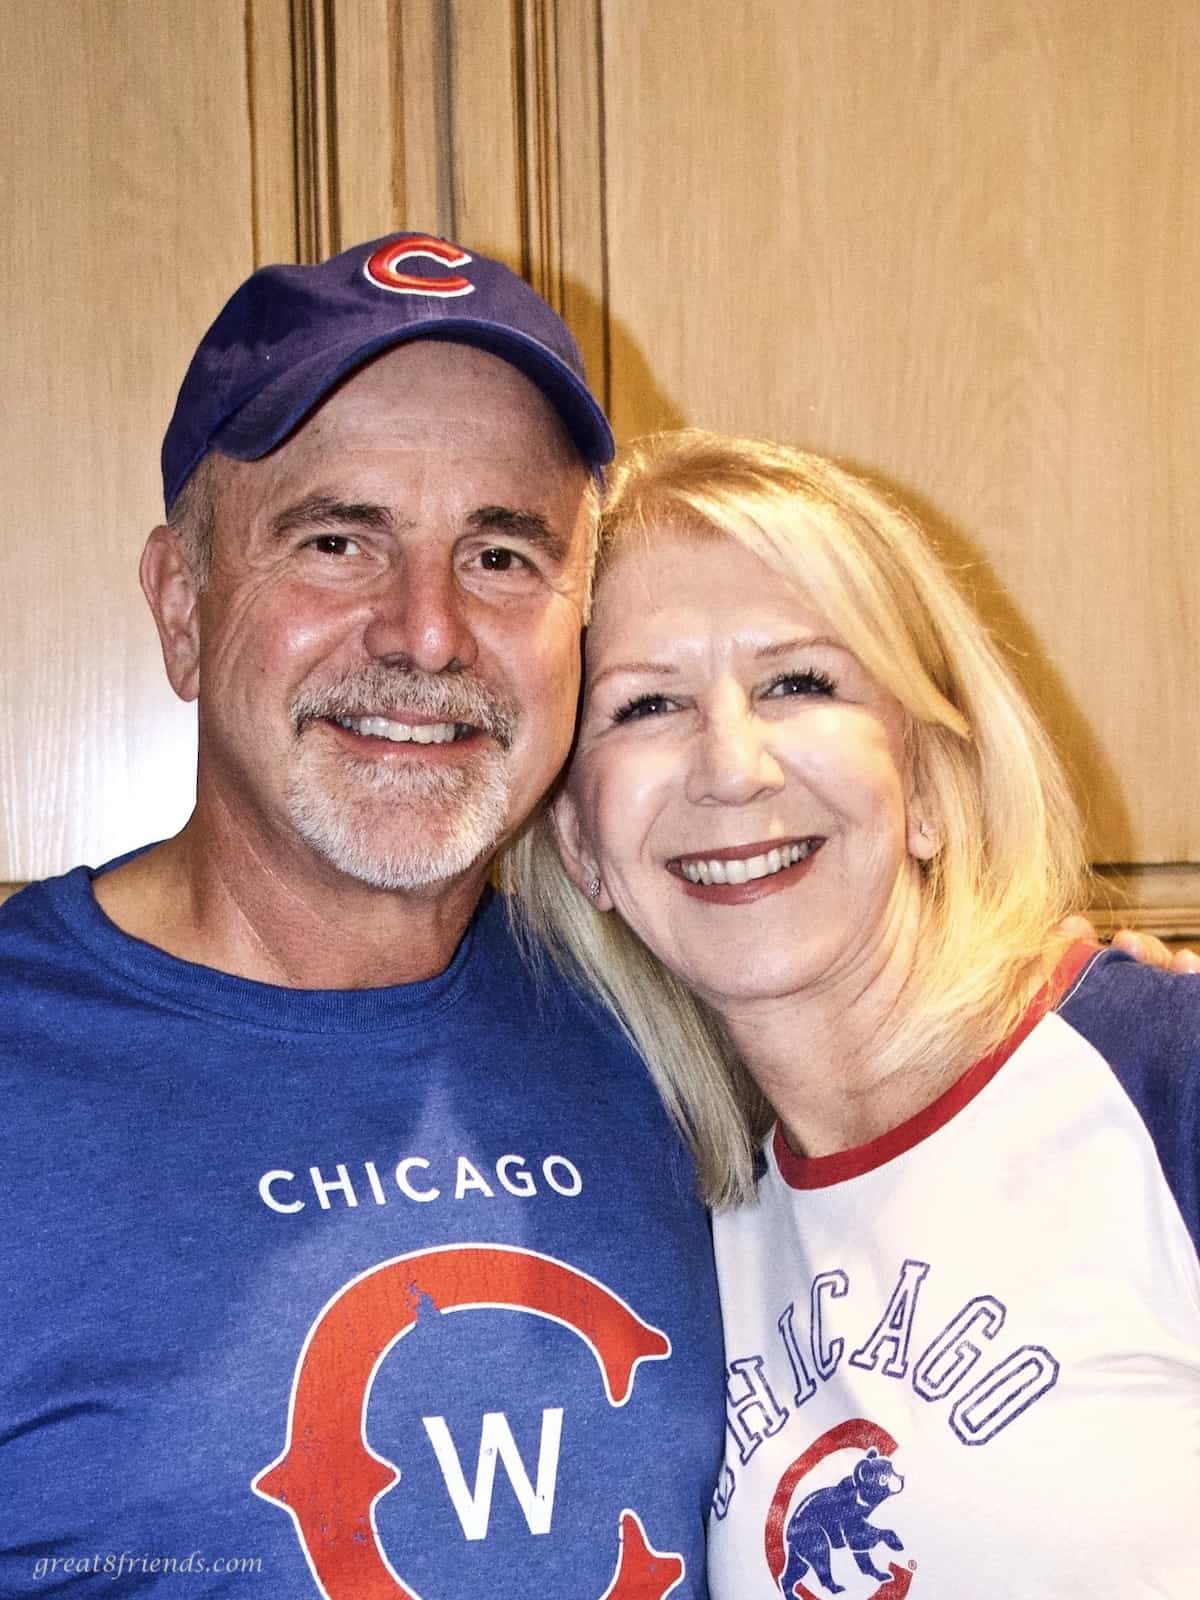 Photo of a couple wearing Chicago Cubs t-shirts.